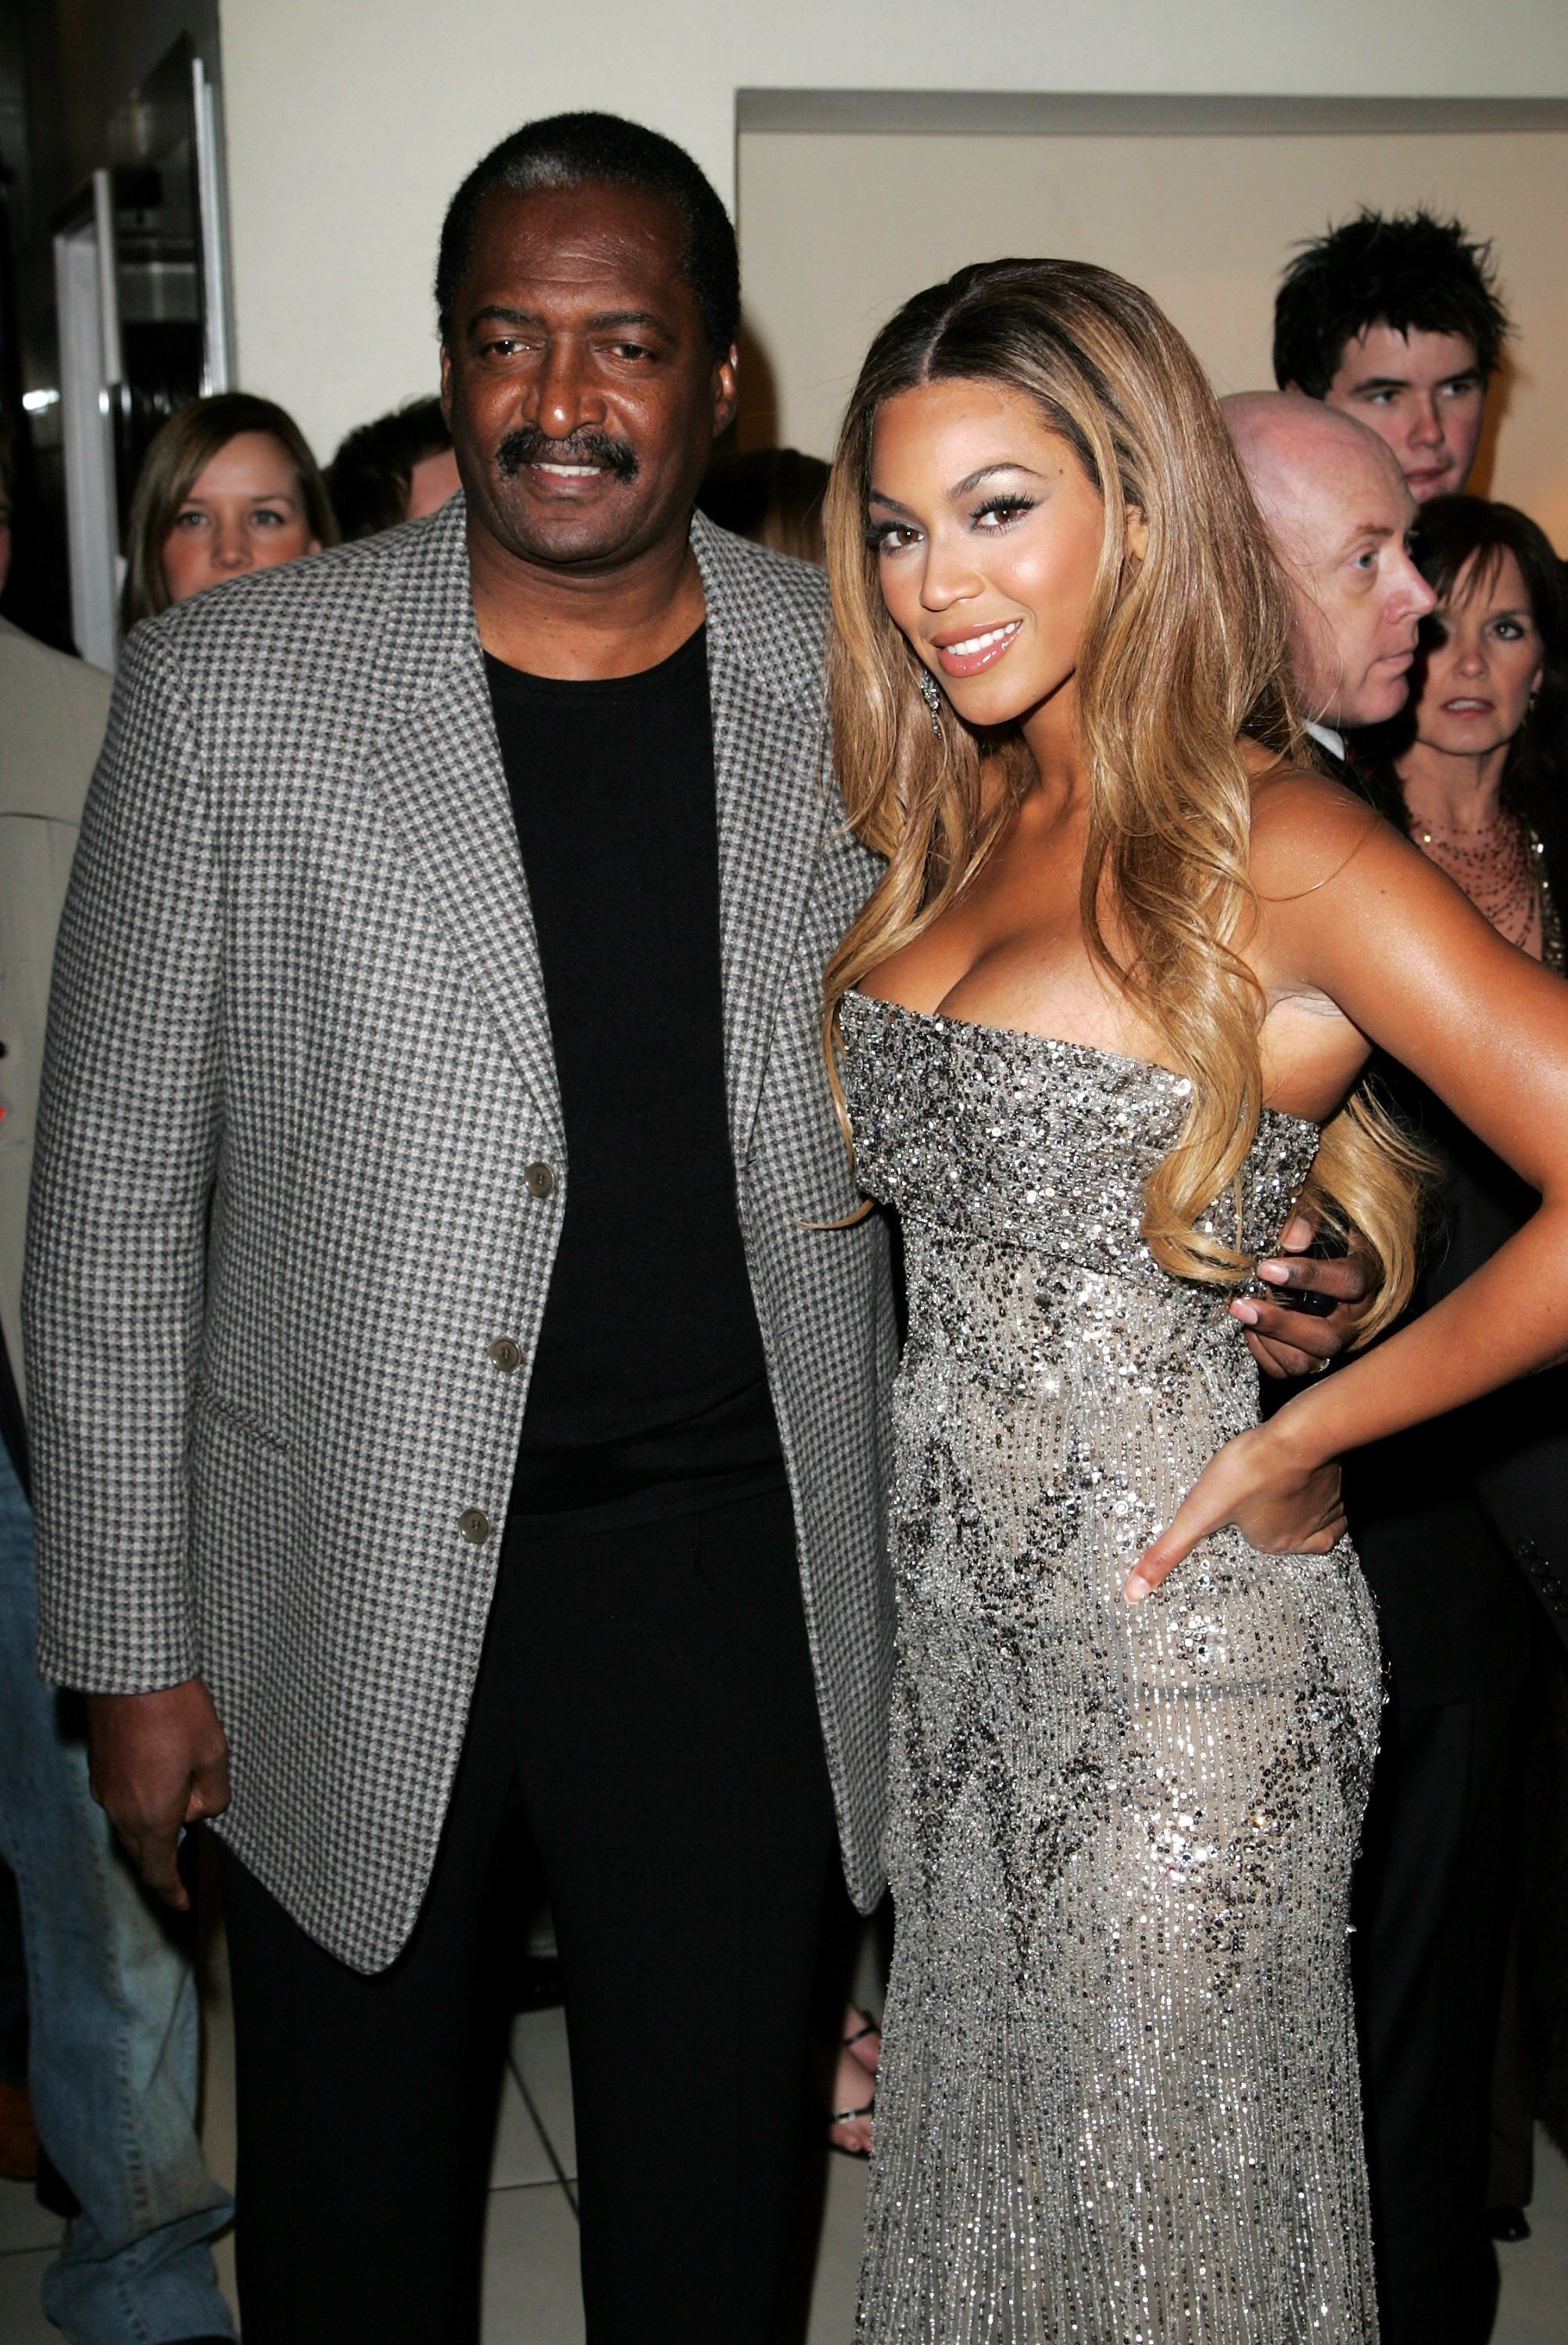 Beyonce Knowles and Mathew Knowles during the UK premiere of "Dreamgirls" at Odeon Leicester Square on January 21, 2007, in London, England. | Source: Getty Images